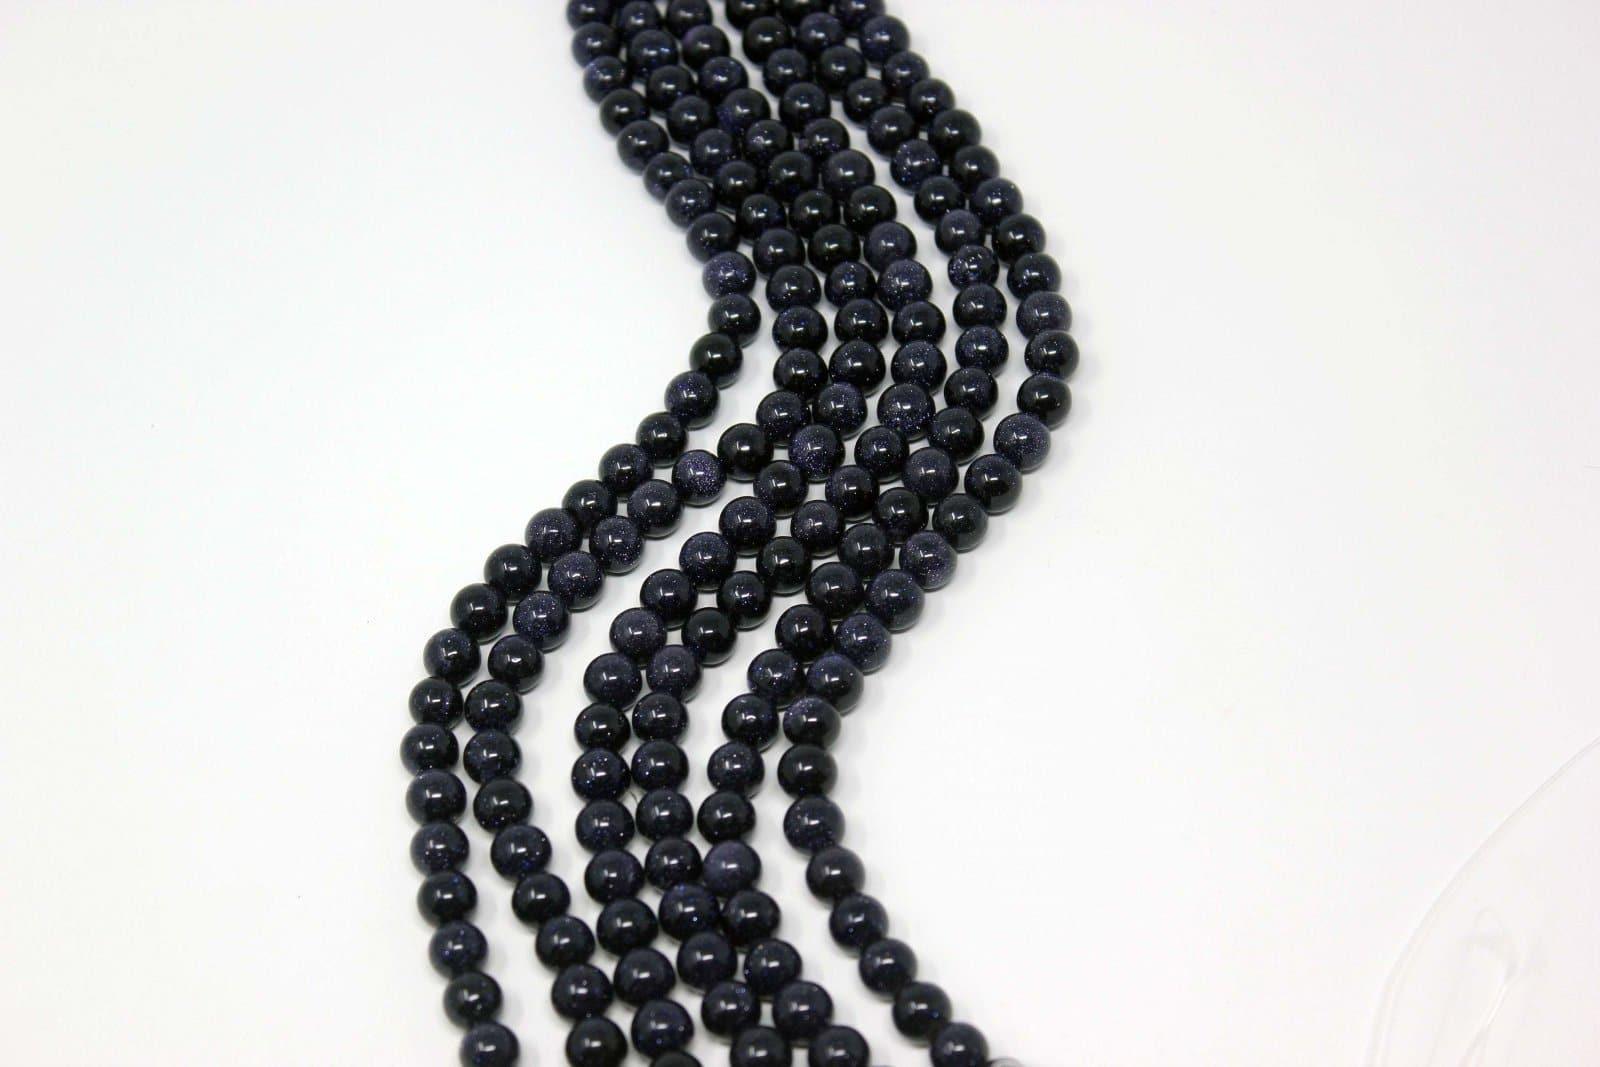 Blue GoldStone Glass 8mm Lapidary Bead 15 Inch Strand! - LapidaryCentral